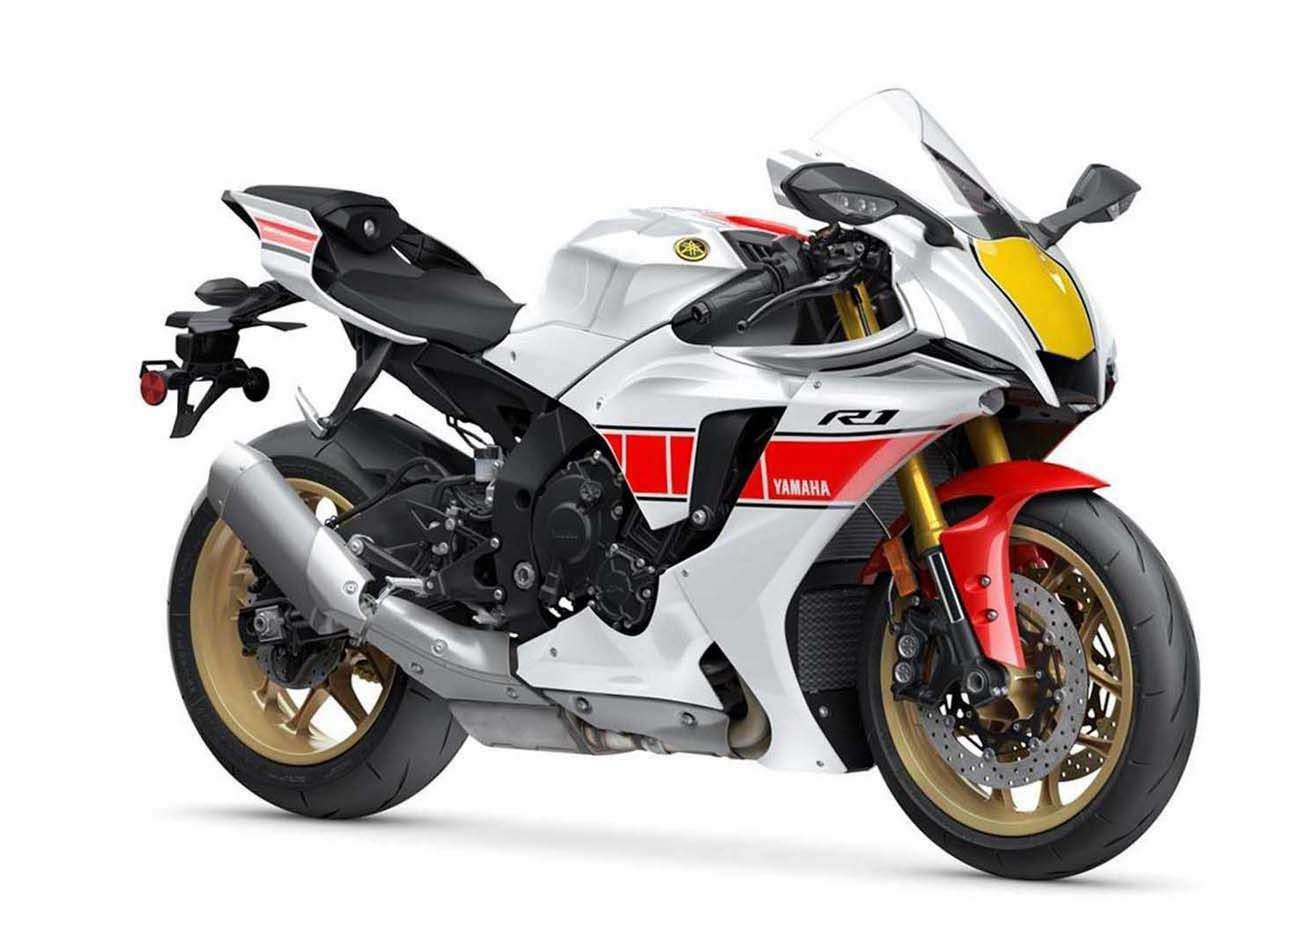 Yamaha YZF 1000 R1 World GP 60th Anniversary Edition technical specifications